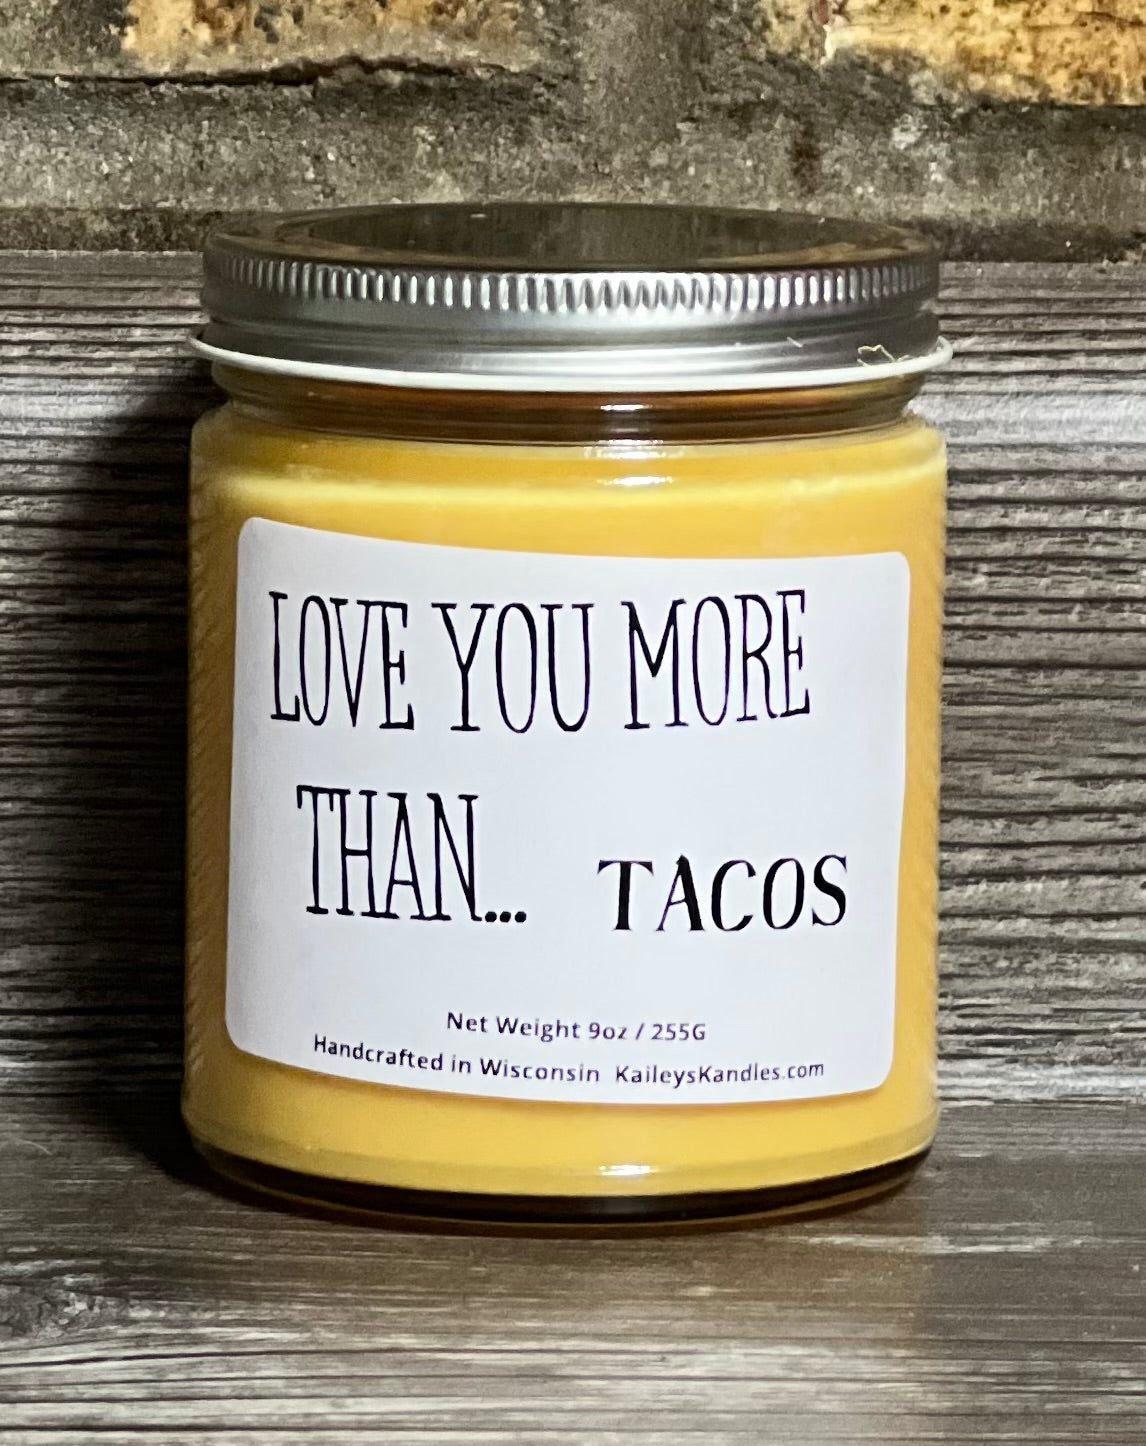 Love you more than... Tacos Candle